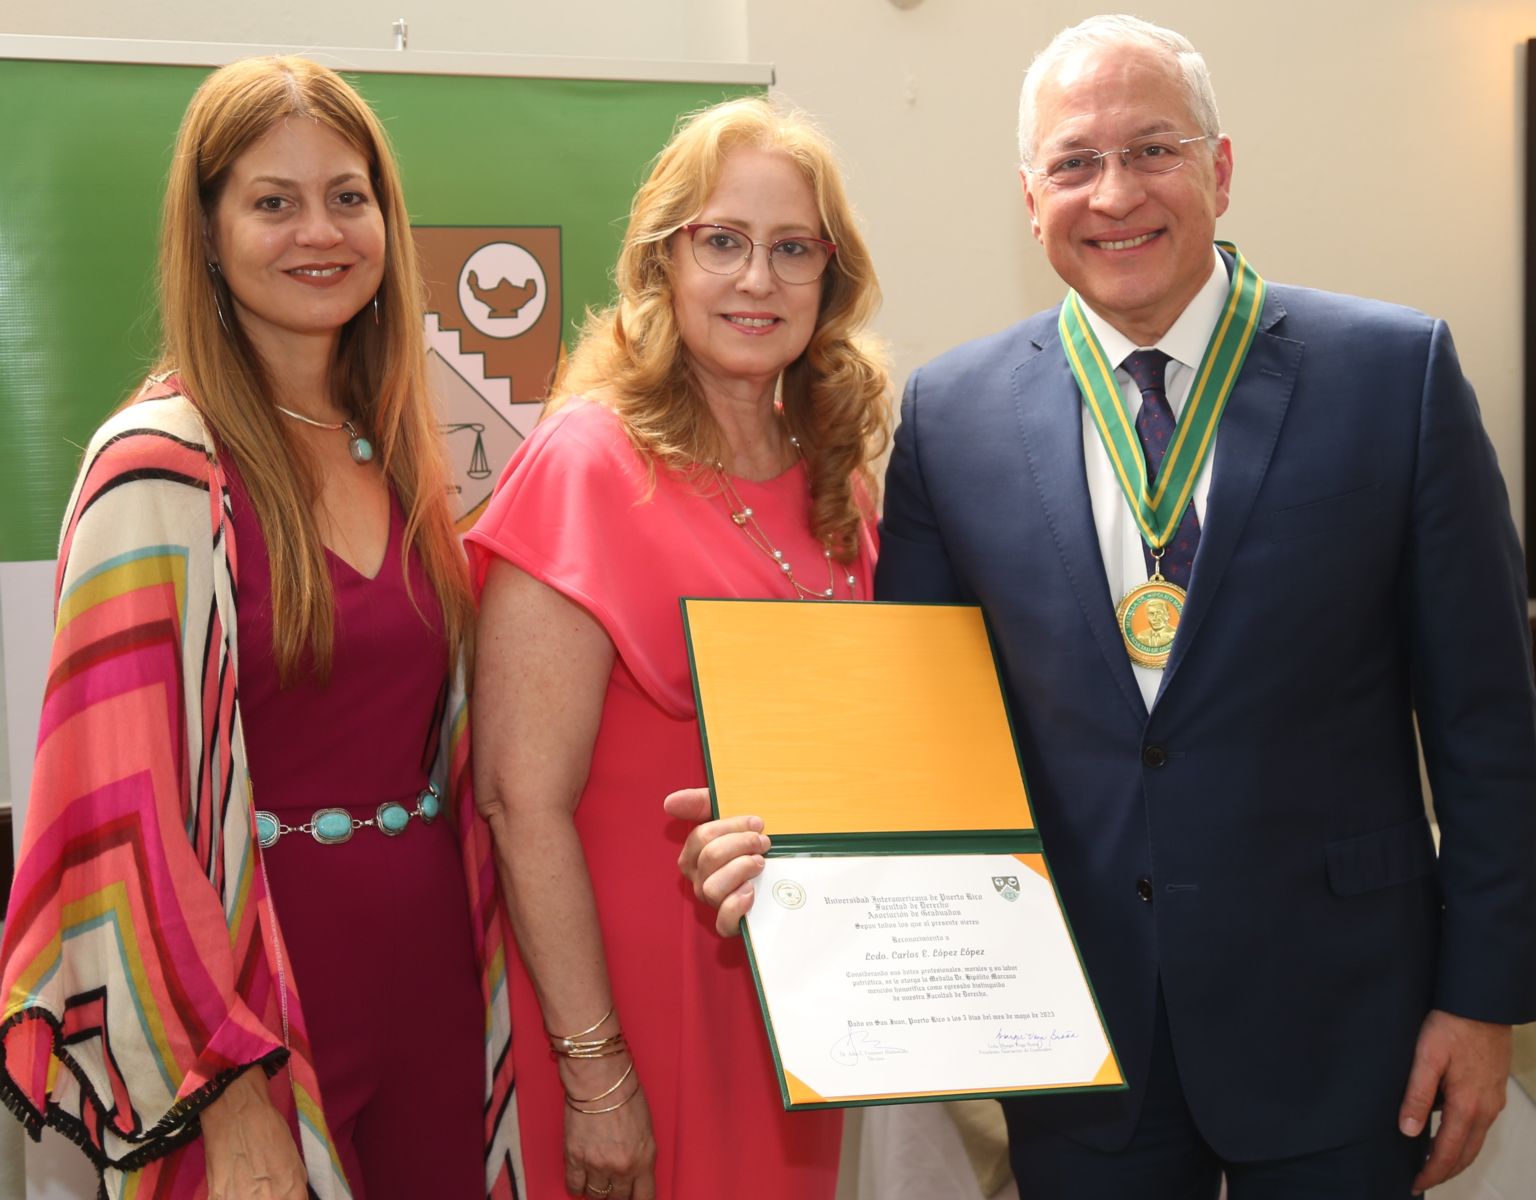 The Alumni Association of the Inter-American University of Puerto Rico’s School of Law honored Carlos E. López López at the 2023 Distinguished Alumni event held May 5, 2023. In the photo appears, to the left of Mr. López, Ms. Sheila Gómez, Director of Development of the Inter-American University of Puerto Rico’s School of Law, and Ms. Margie Vega Braña, Esq.,  President of the Alumni Association of the Inter-American University of Puerto Rico’s School of Law. 